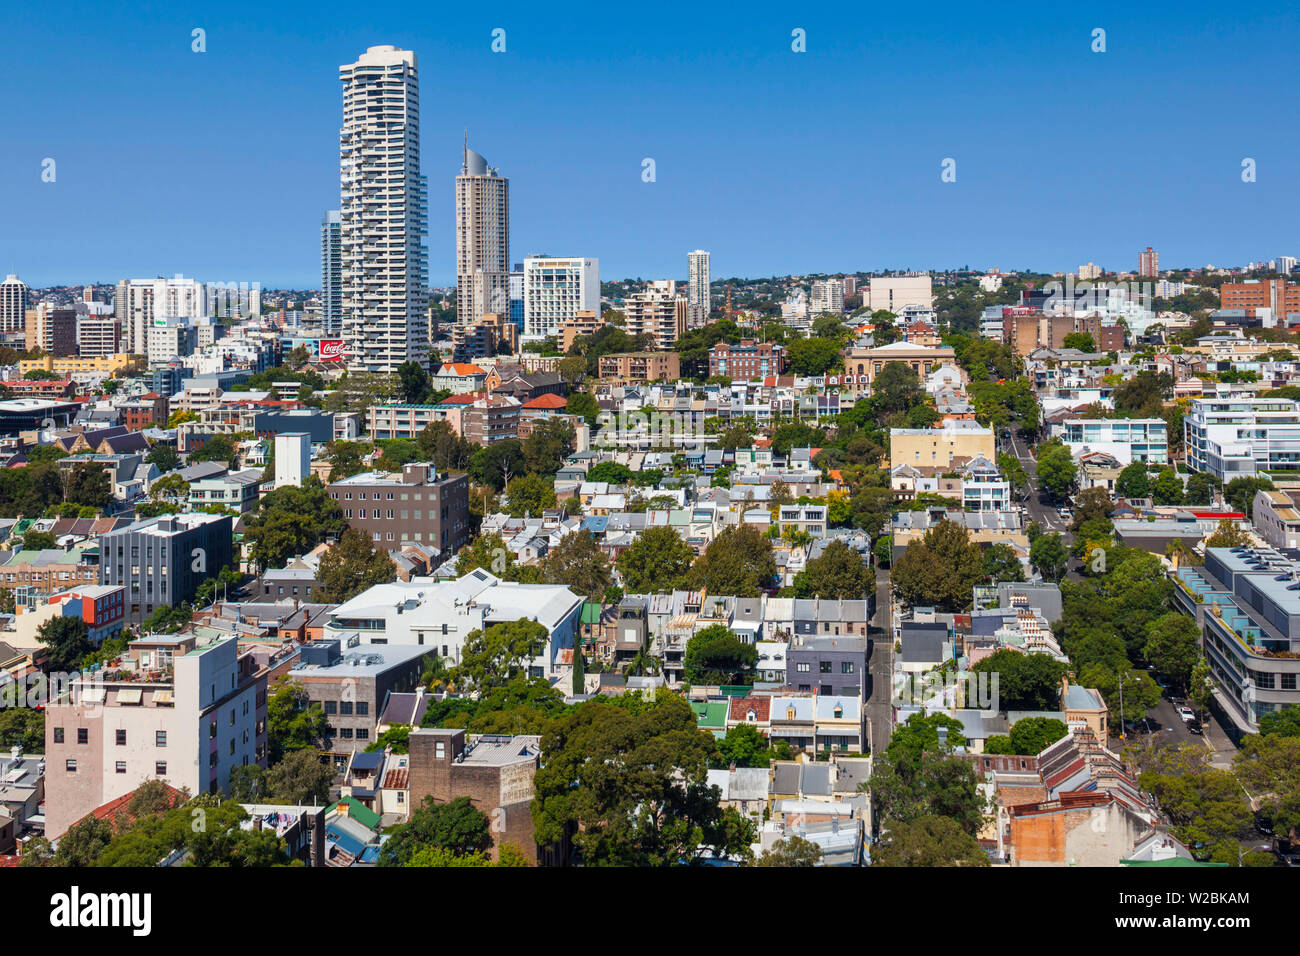 Australia, New South Wales, NSW, Sydney, elevated view of King's Cross area Stock Photo